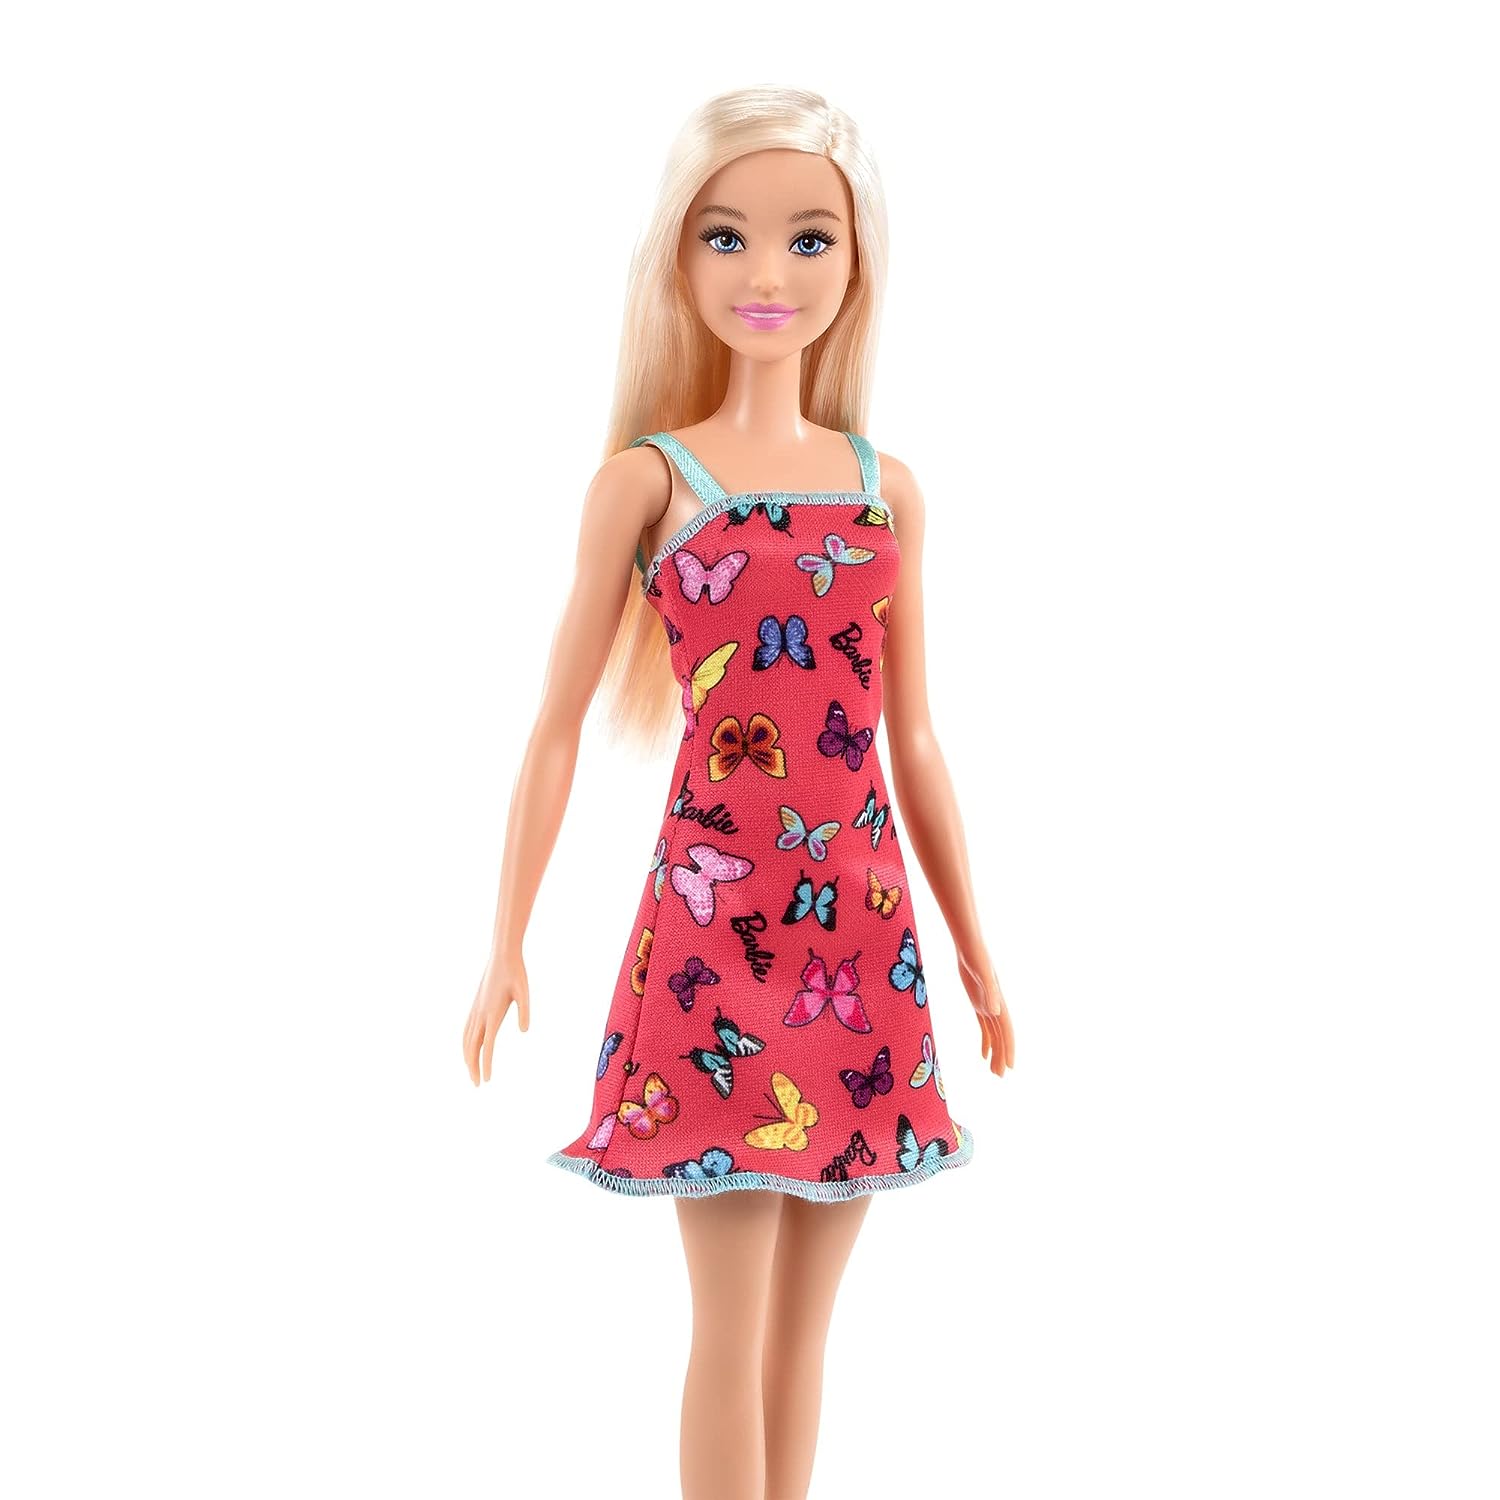 Barbie Doll (11.5 inches) with Colorful Butterfly Logo Print Red Dress & Strappy Heels, Great Gift for Ages 3 Years Old & Up